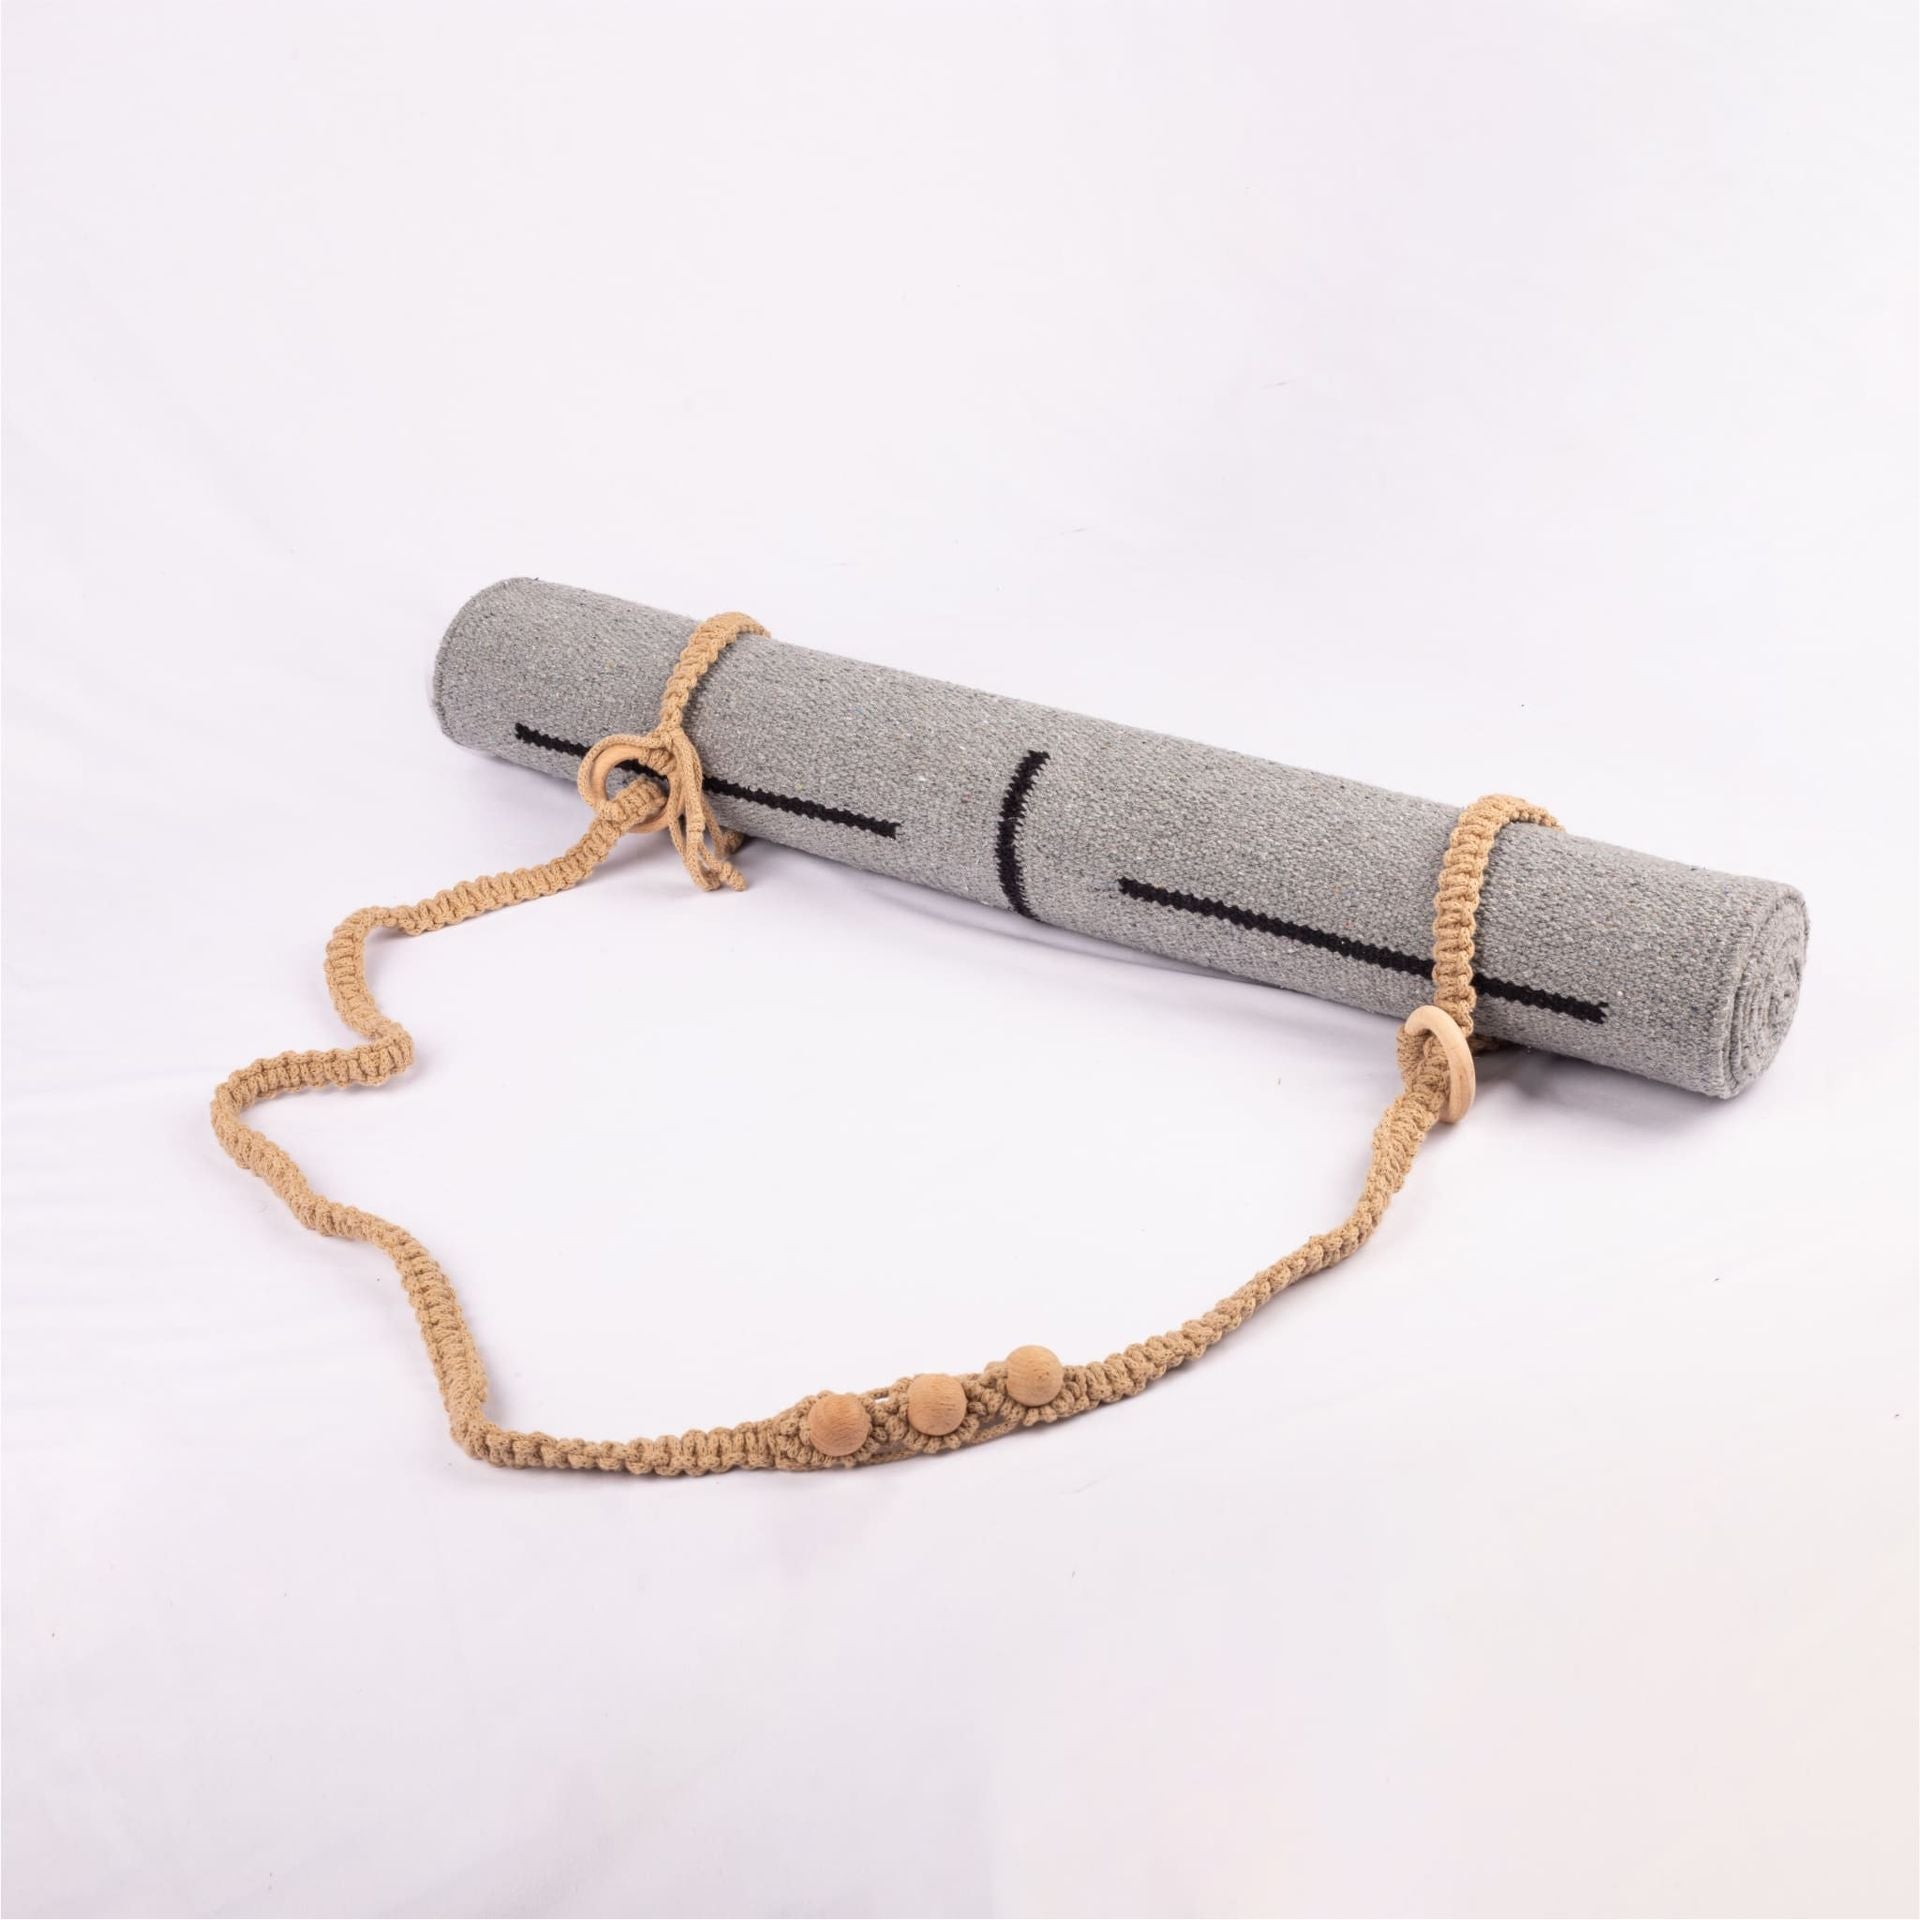 COTTON YOGA MAT - GEMSTONE SERIES 100%COTTON WASHABLE RUBBER BACKING MADE IN INDIA 4 MM WITH CARRYING STRAP AND BAG COLOUR PEARL GREY - hfnl!fe